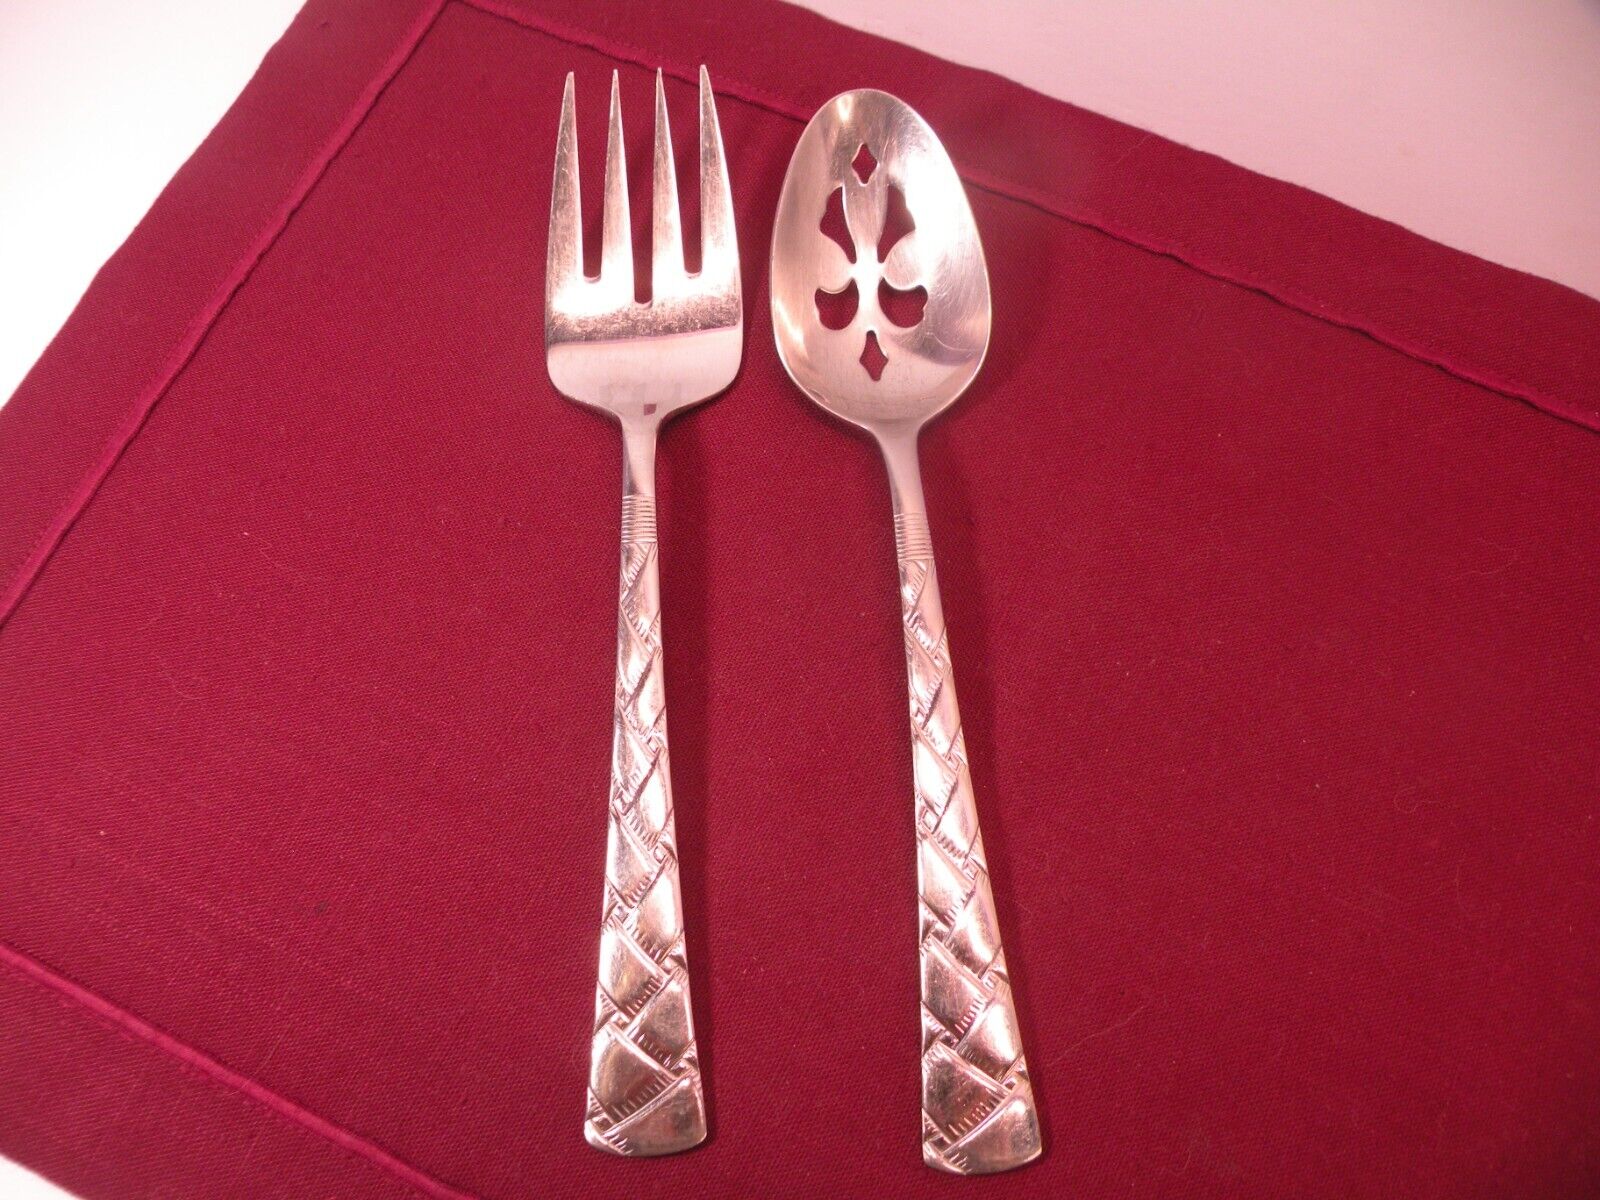 2 Serving pieces of Pfaltzgraff Stainless Cranbrook Meat Fork & Serving Spoon